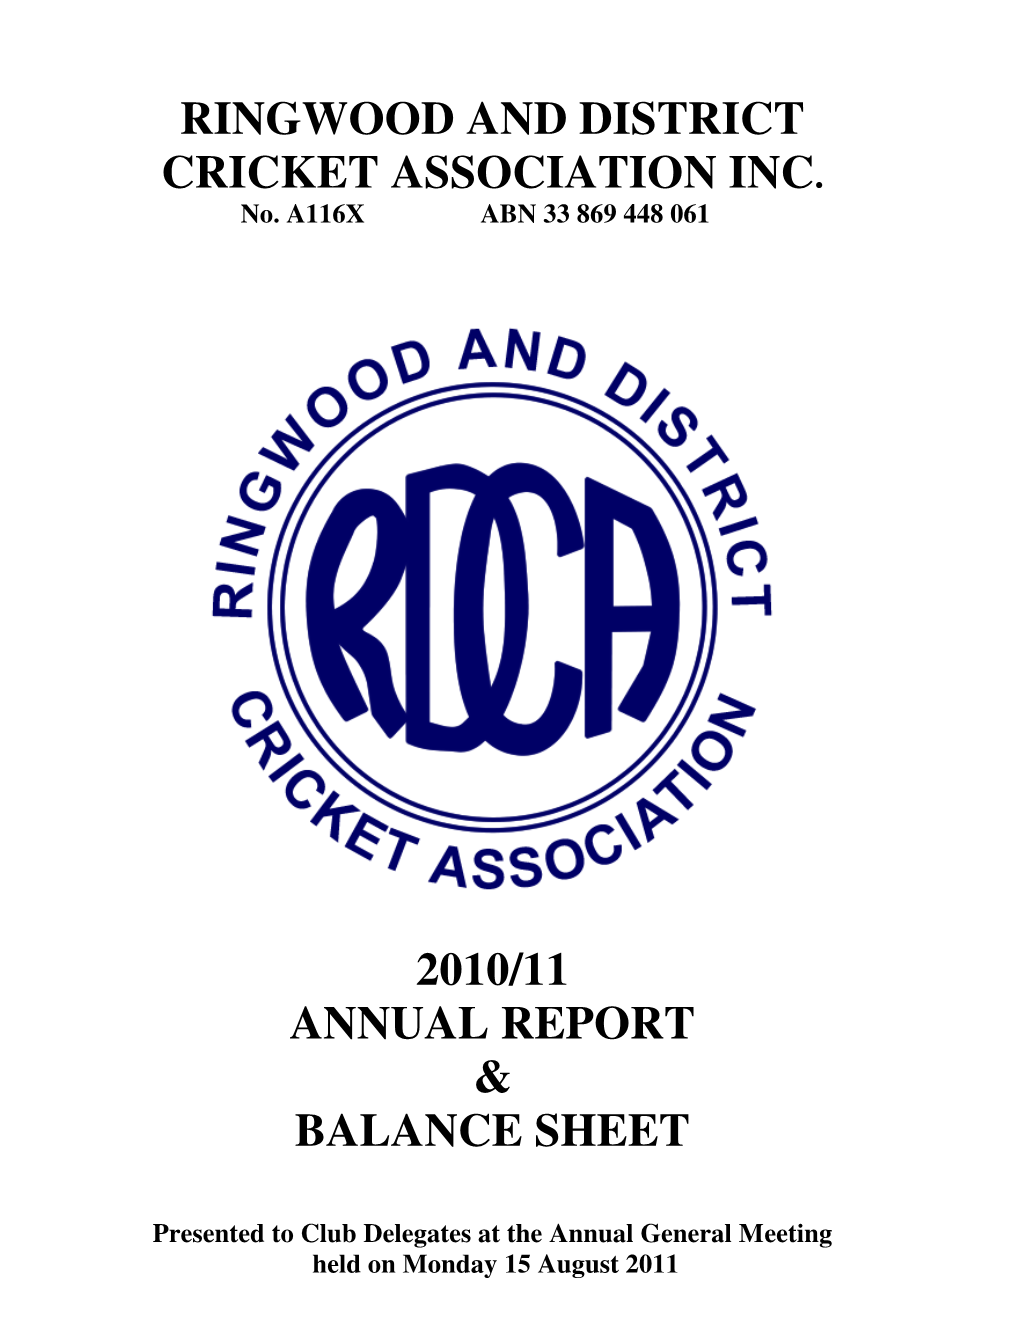 Ringwood and District Cricket Association Inc. 2010/11 Annual Report & Balance Sheet